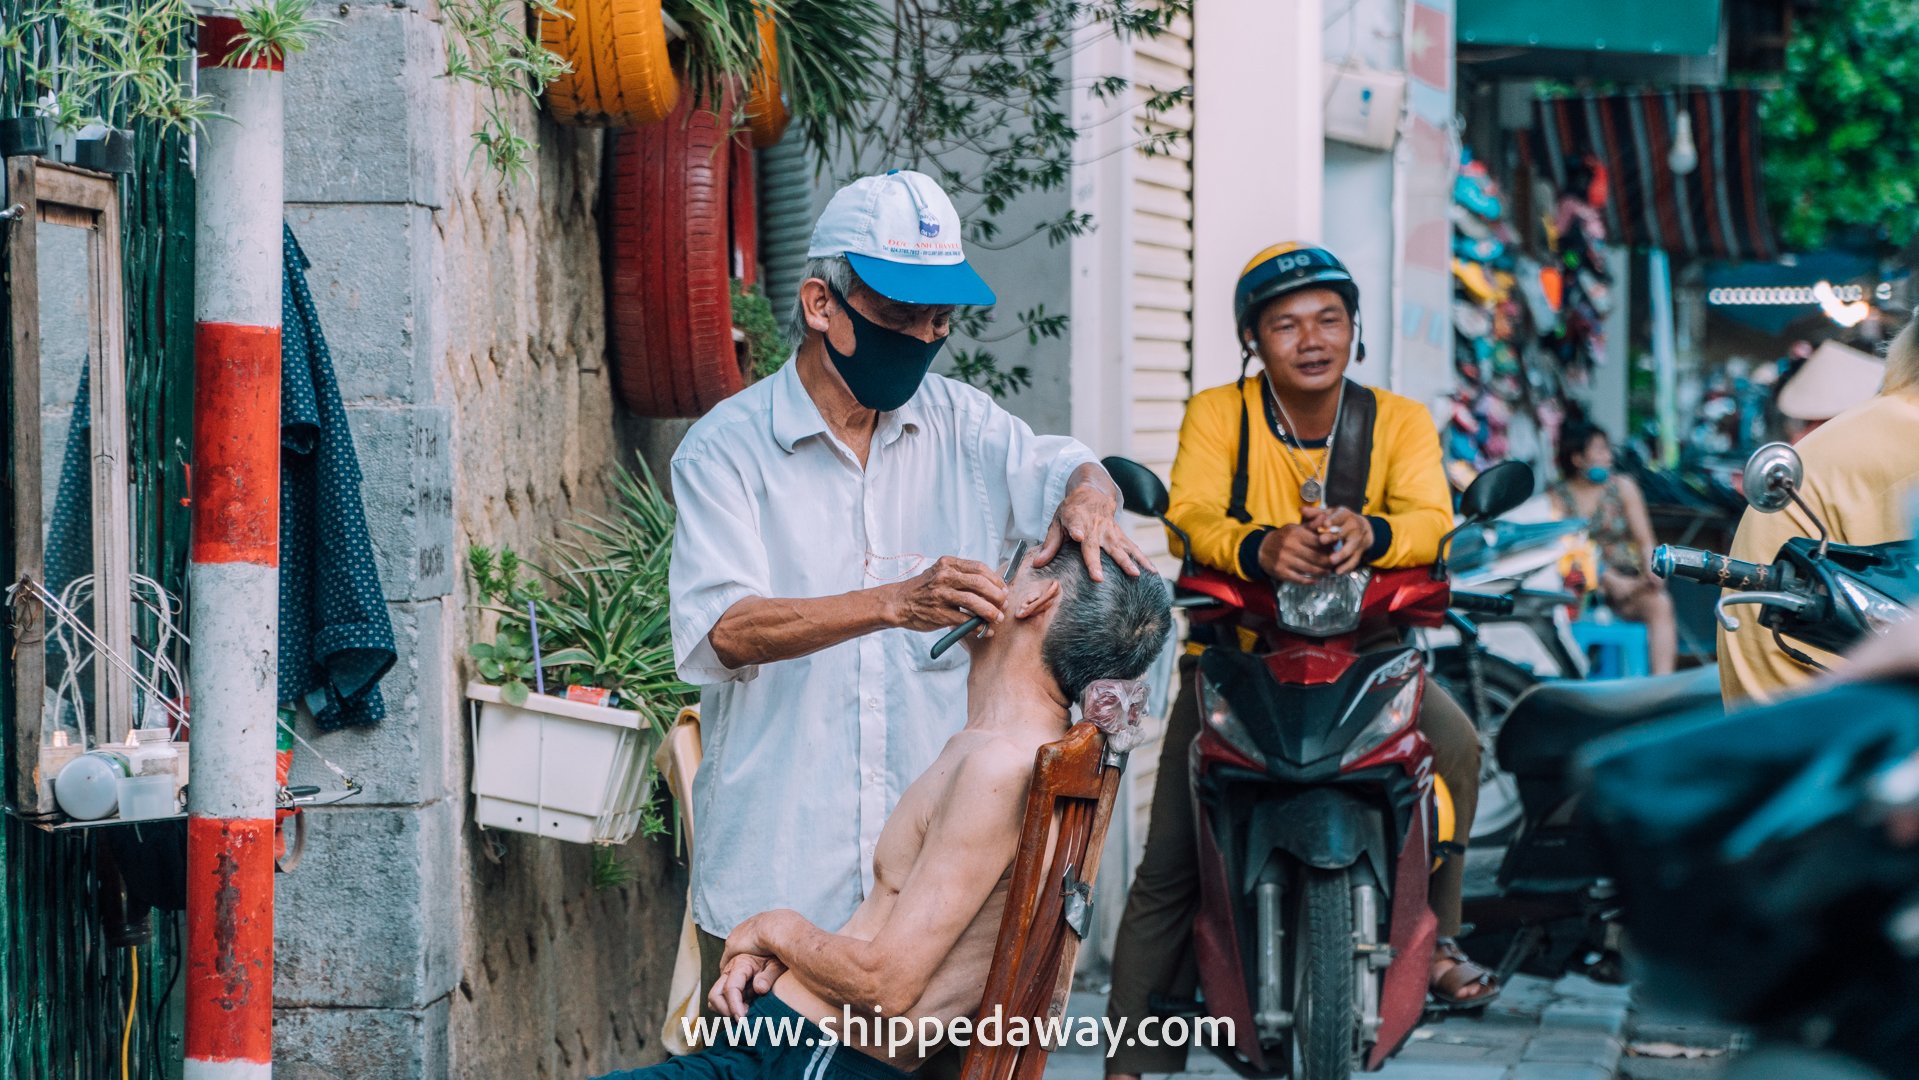 Man getting a shave on the streets of Hanoi's Old Quarter, Vietnam